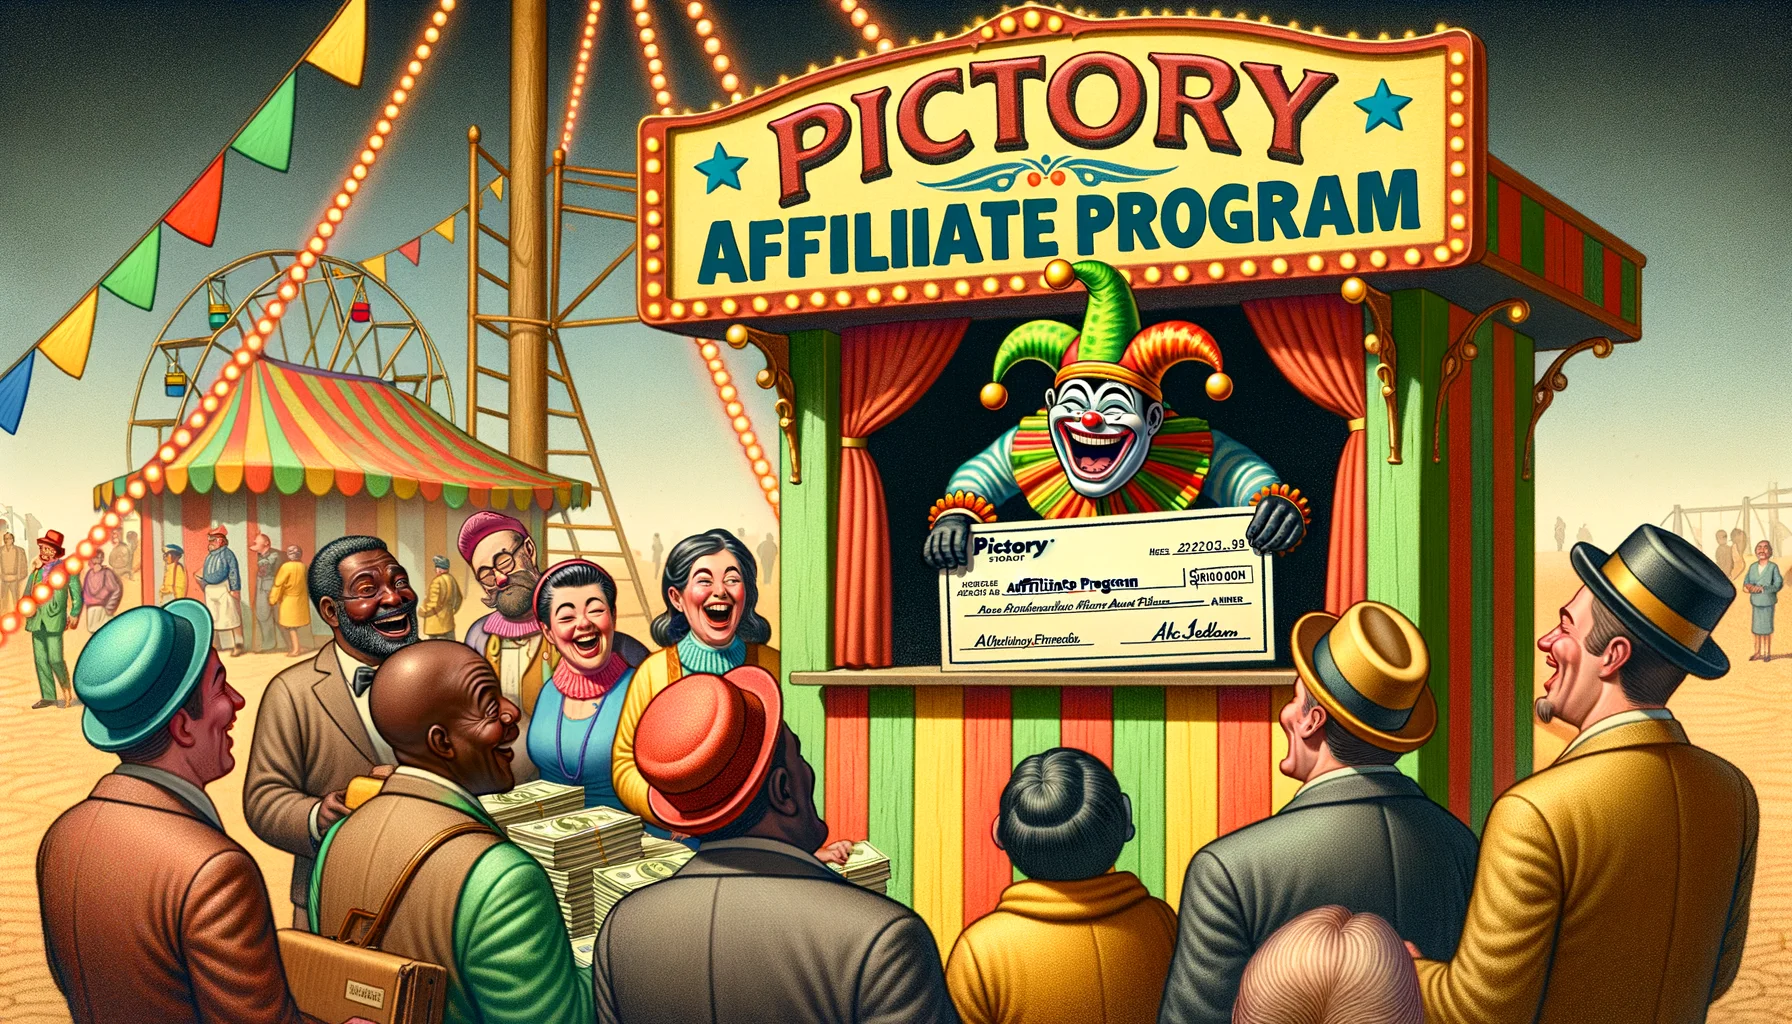 Illustrate a playful, comical scenario showcasing an affiliate program. Begin with a jester standing at an old-timey carnival booth, with a huge brightly colored sign that reads 'Pictory Affiliate Program'. The jester, who is laughing hysterically, is presenting oversized checks to amused carnival visitors who are of varying descents such as Black, Hispanic, Asian, and white. The visitors are successful affiliates, surprised and delighted by their earnings. This humorous depiction of the affiliate program should invoke feelings of joy, surprise, and excitement, embellished with a touch of surrealism for comical effect.